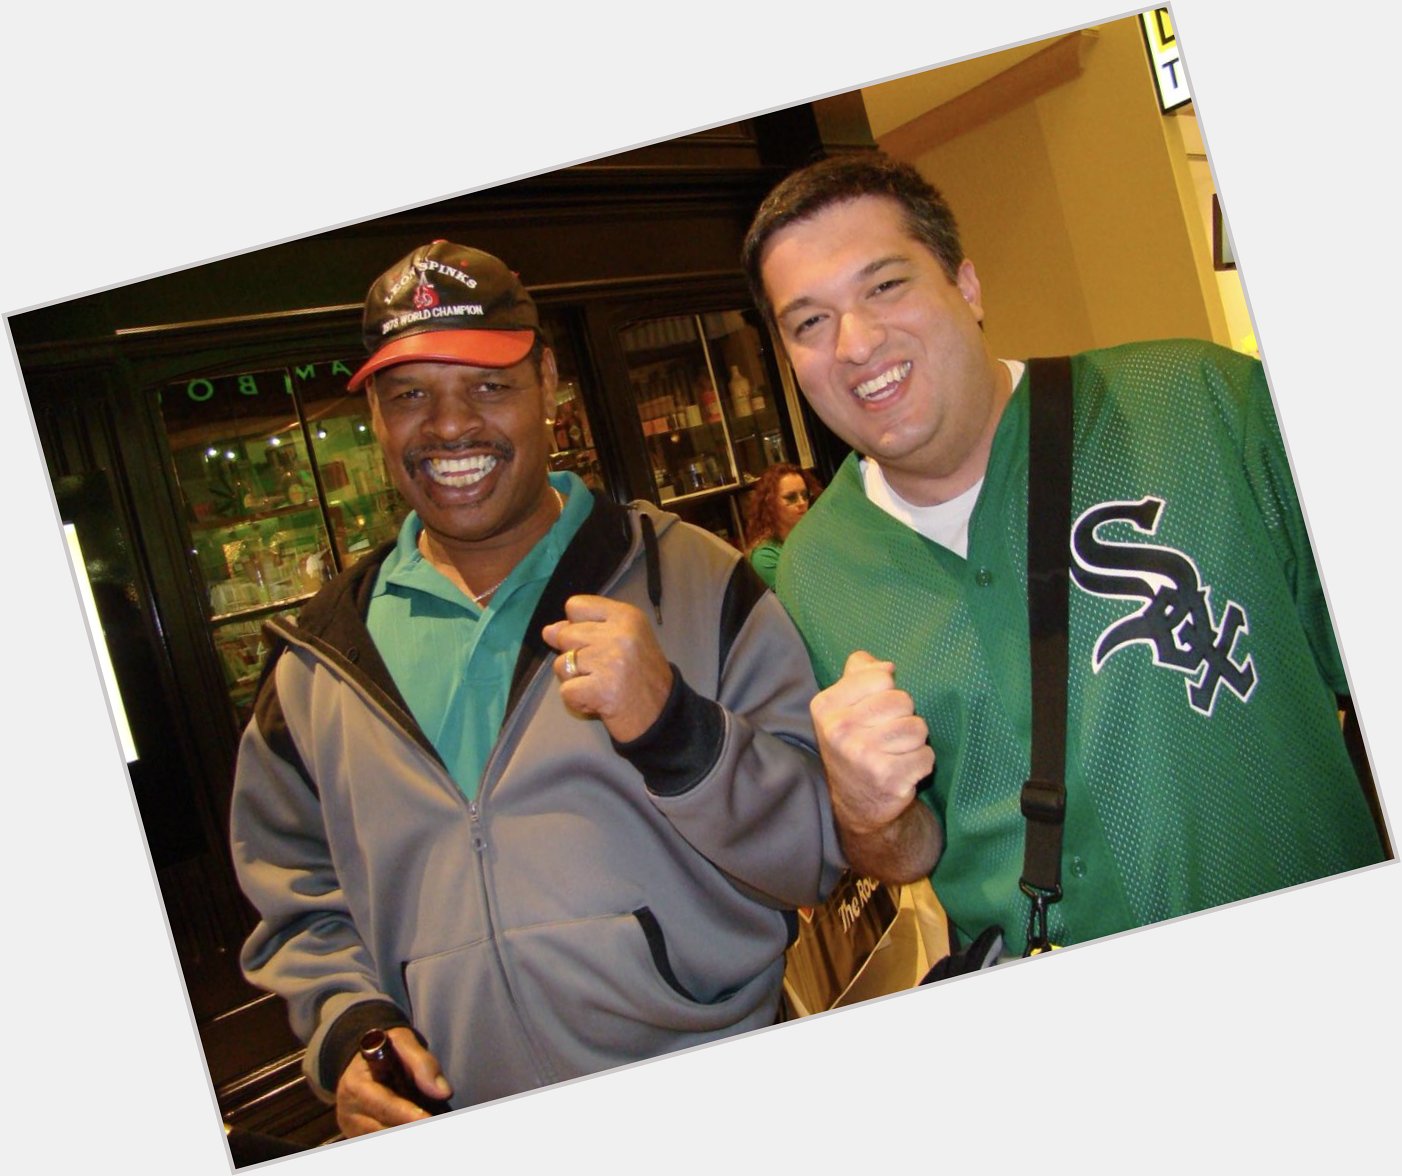 Happy Birthday to the champ Leon Spinks... an absolute thrill running into him in Las Vegas a few years back... 